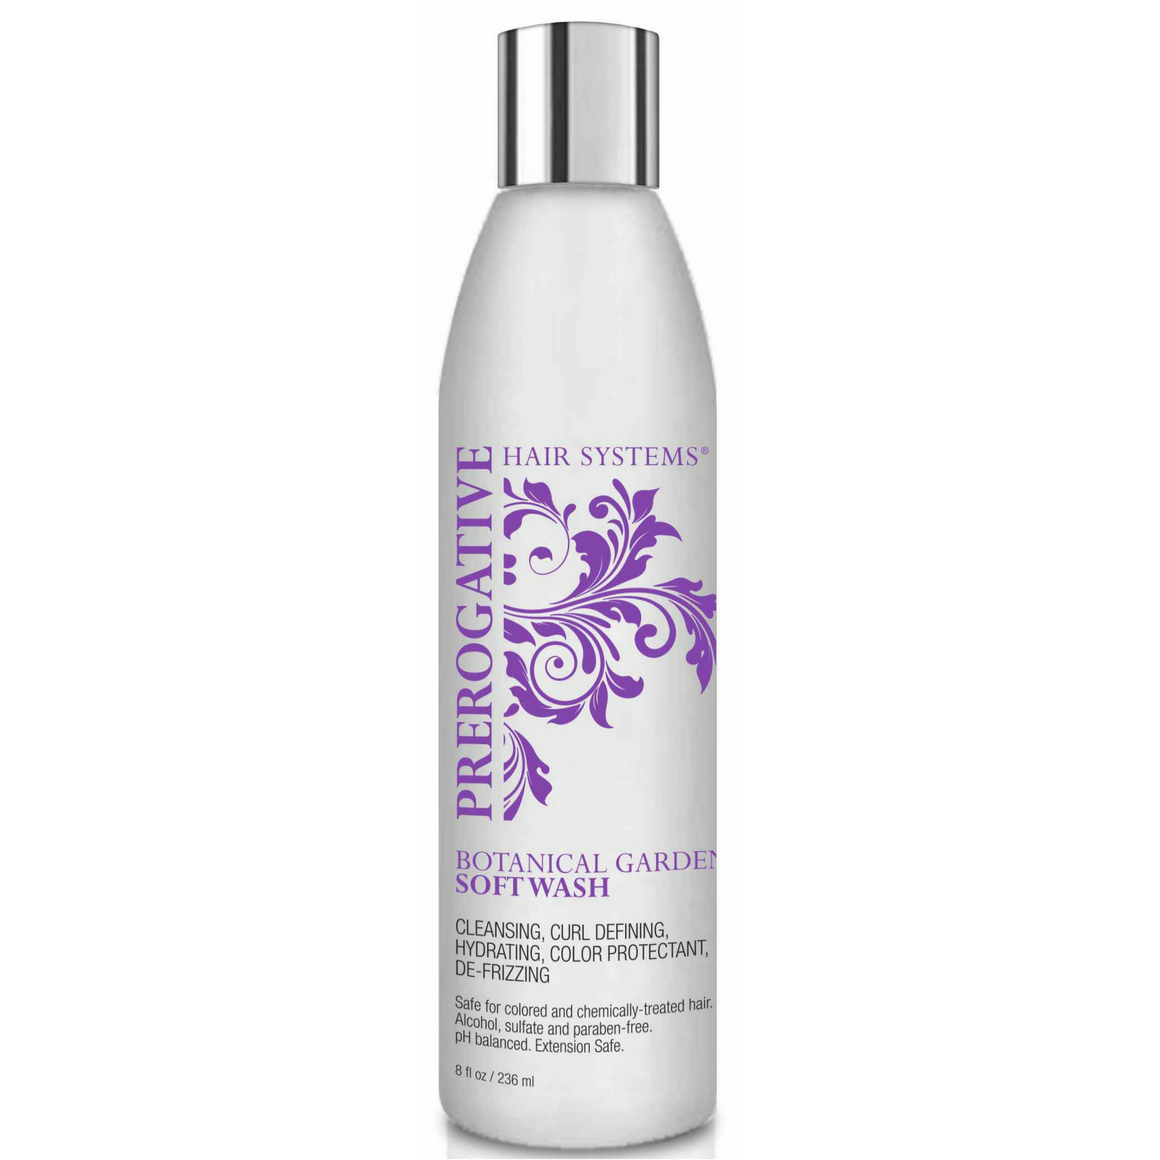 BOTANICAL GARDEN Soft Wash - The best natural hair shampoo that moisturizes, defines curls and cleanses, gently.